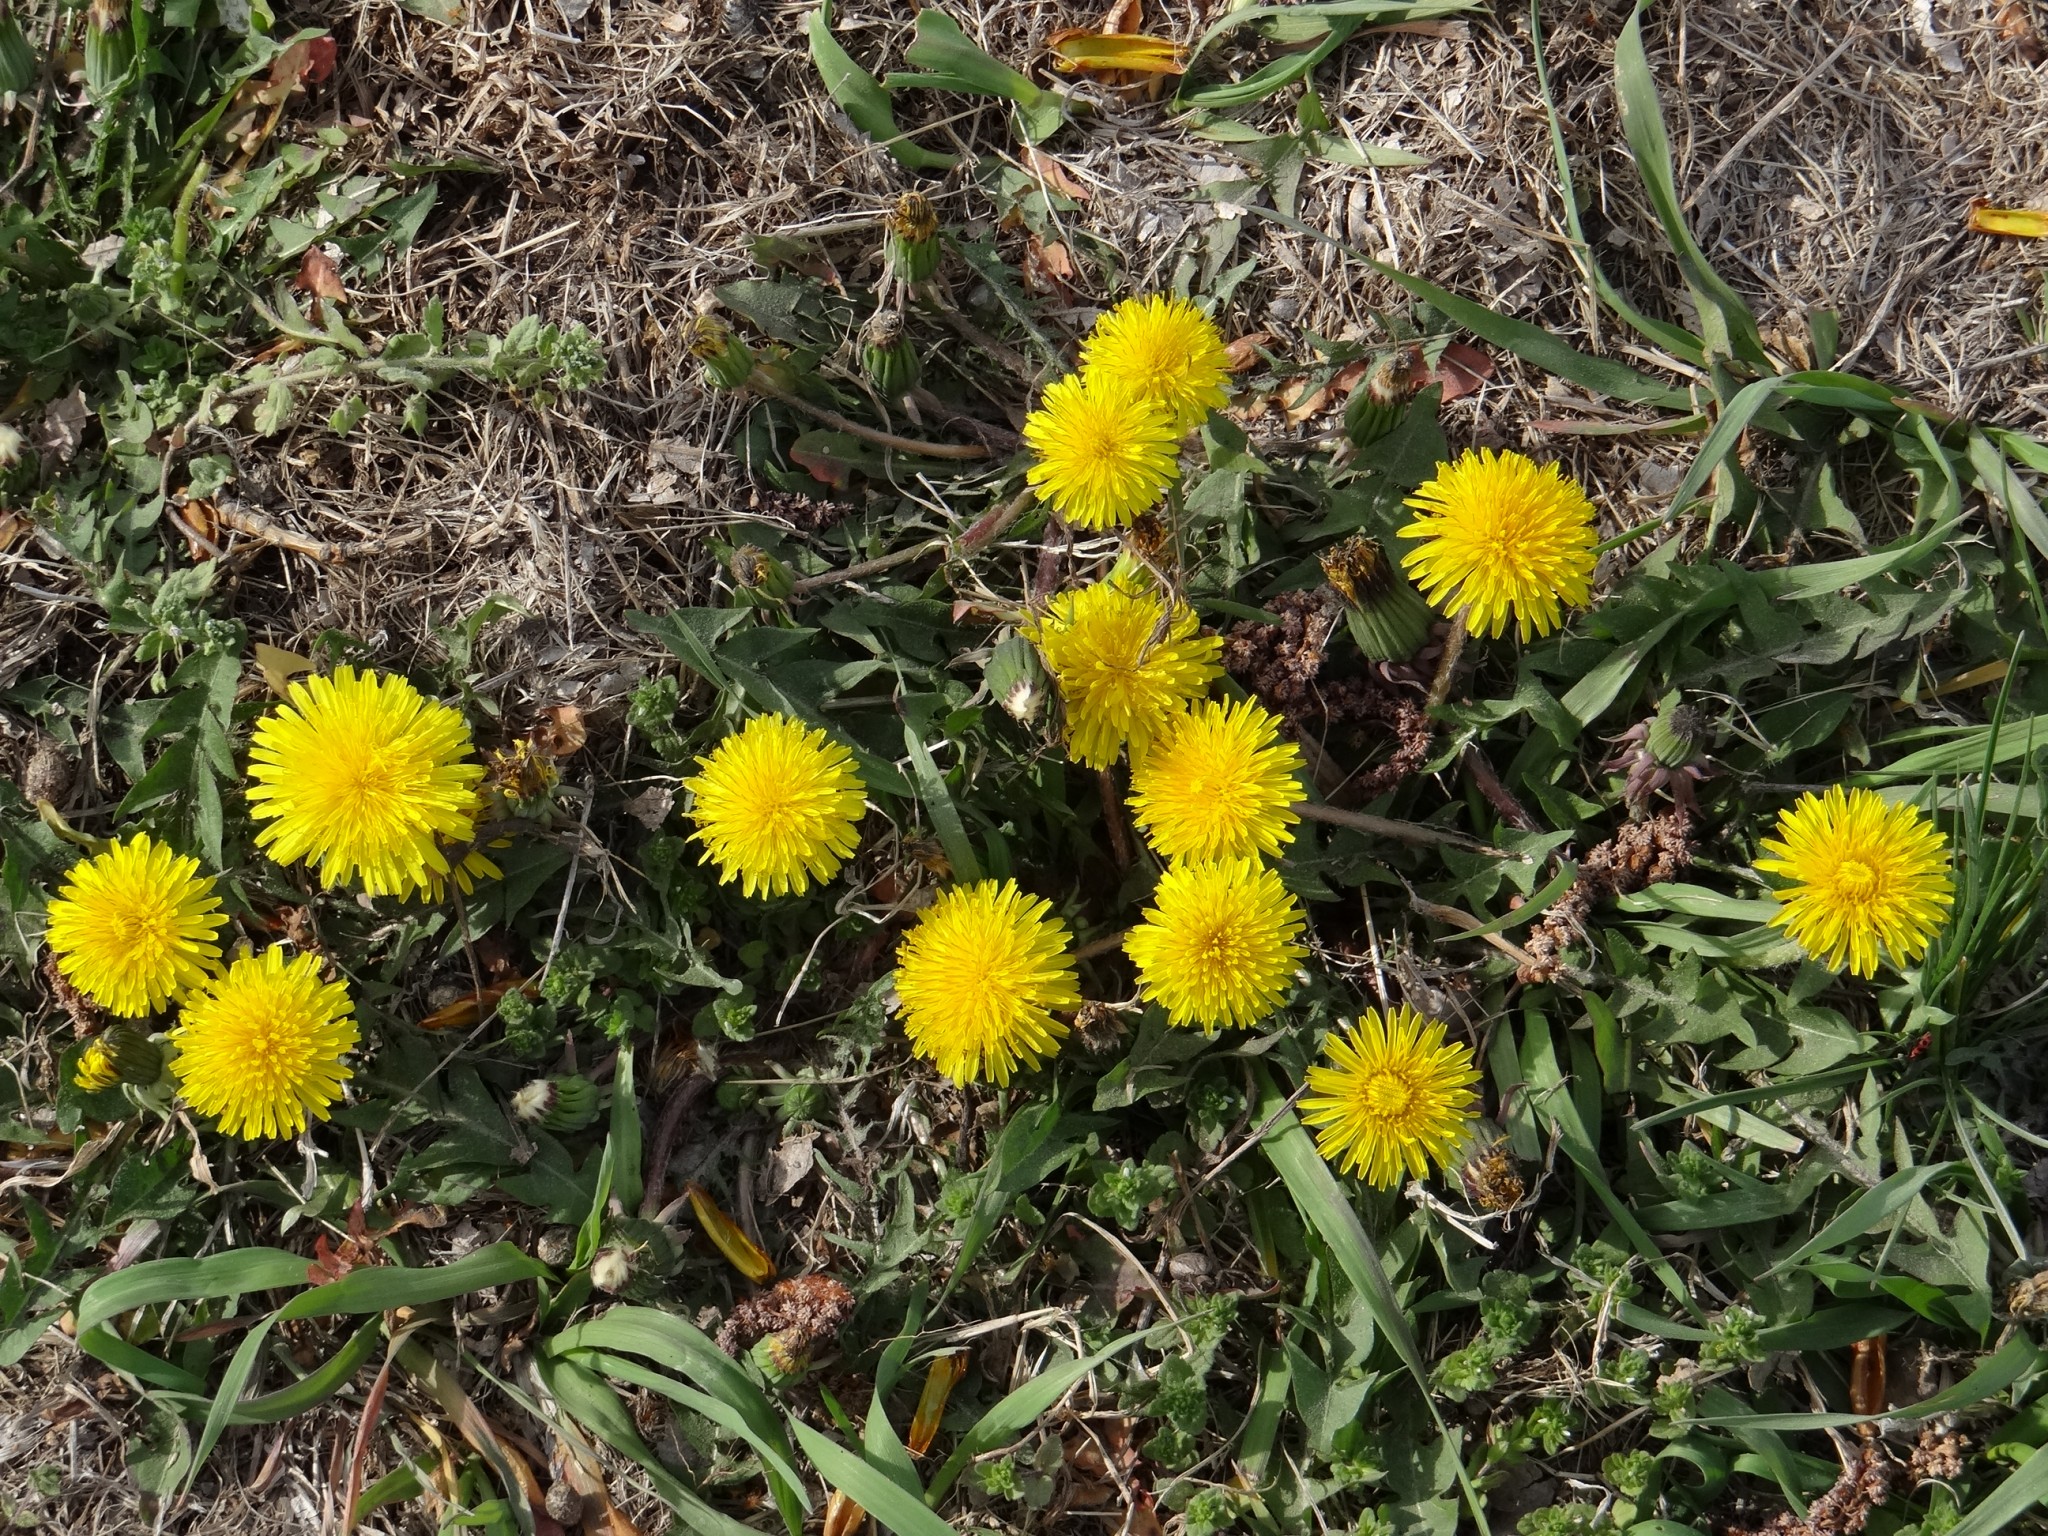 Common dandelions. Photo by Greg Wagner.